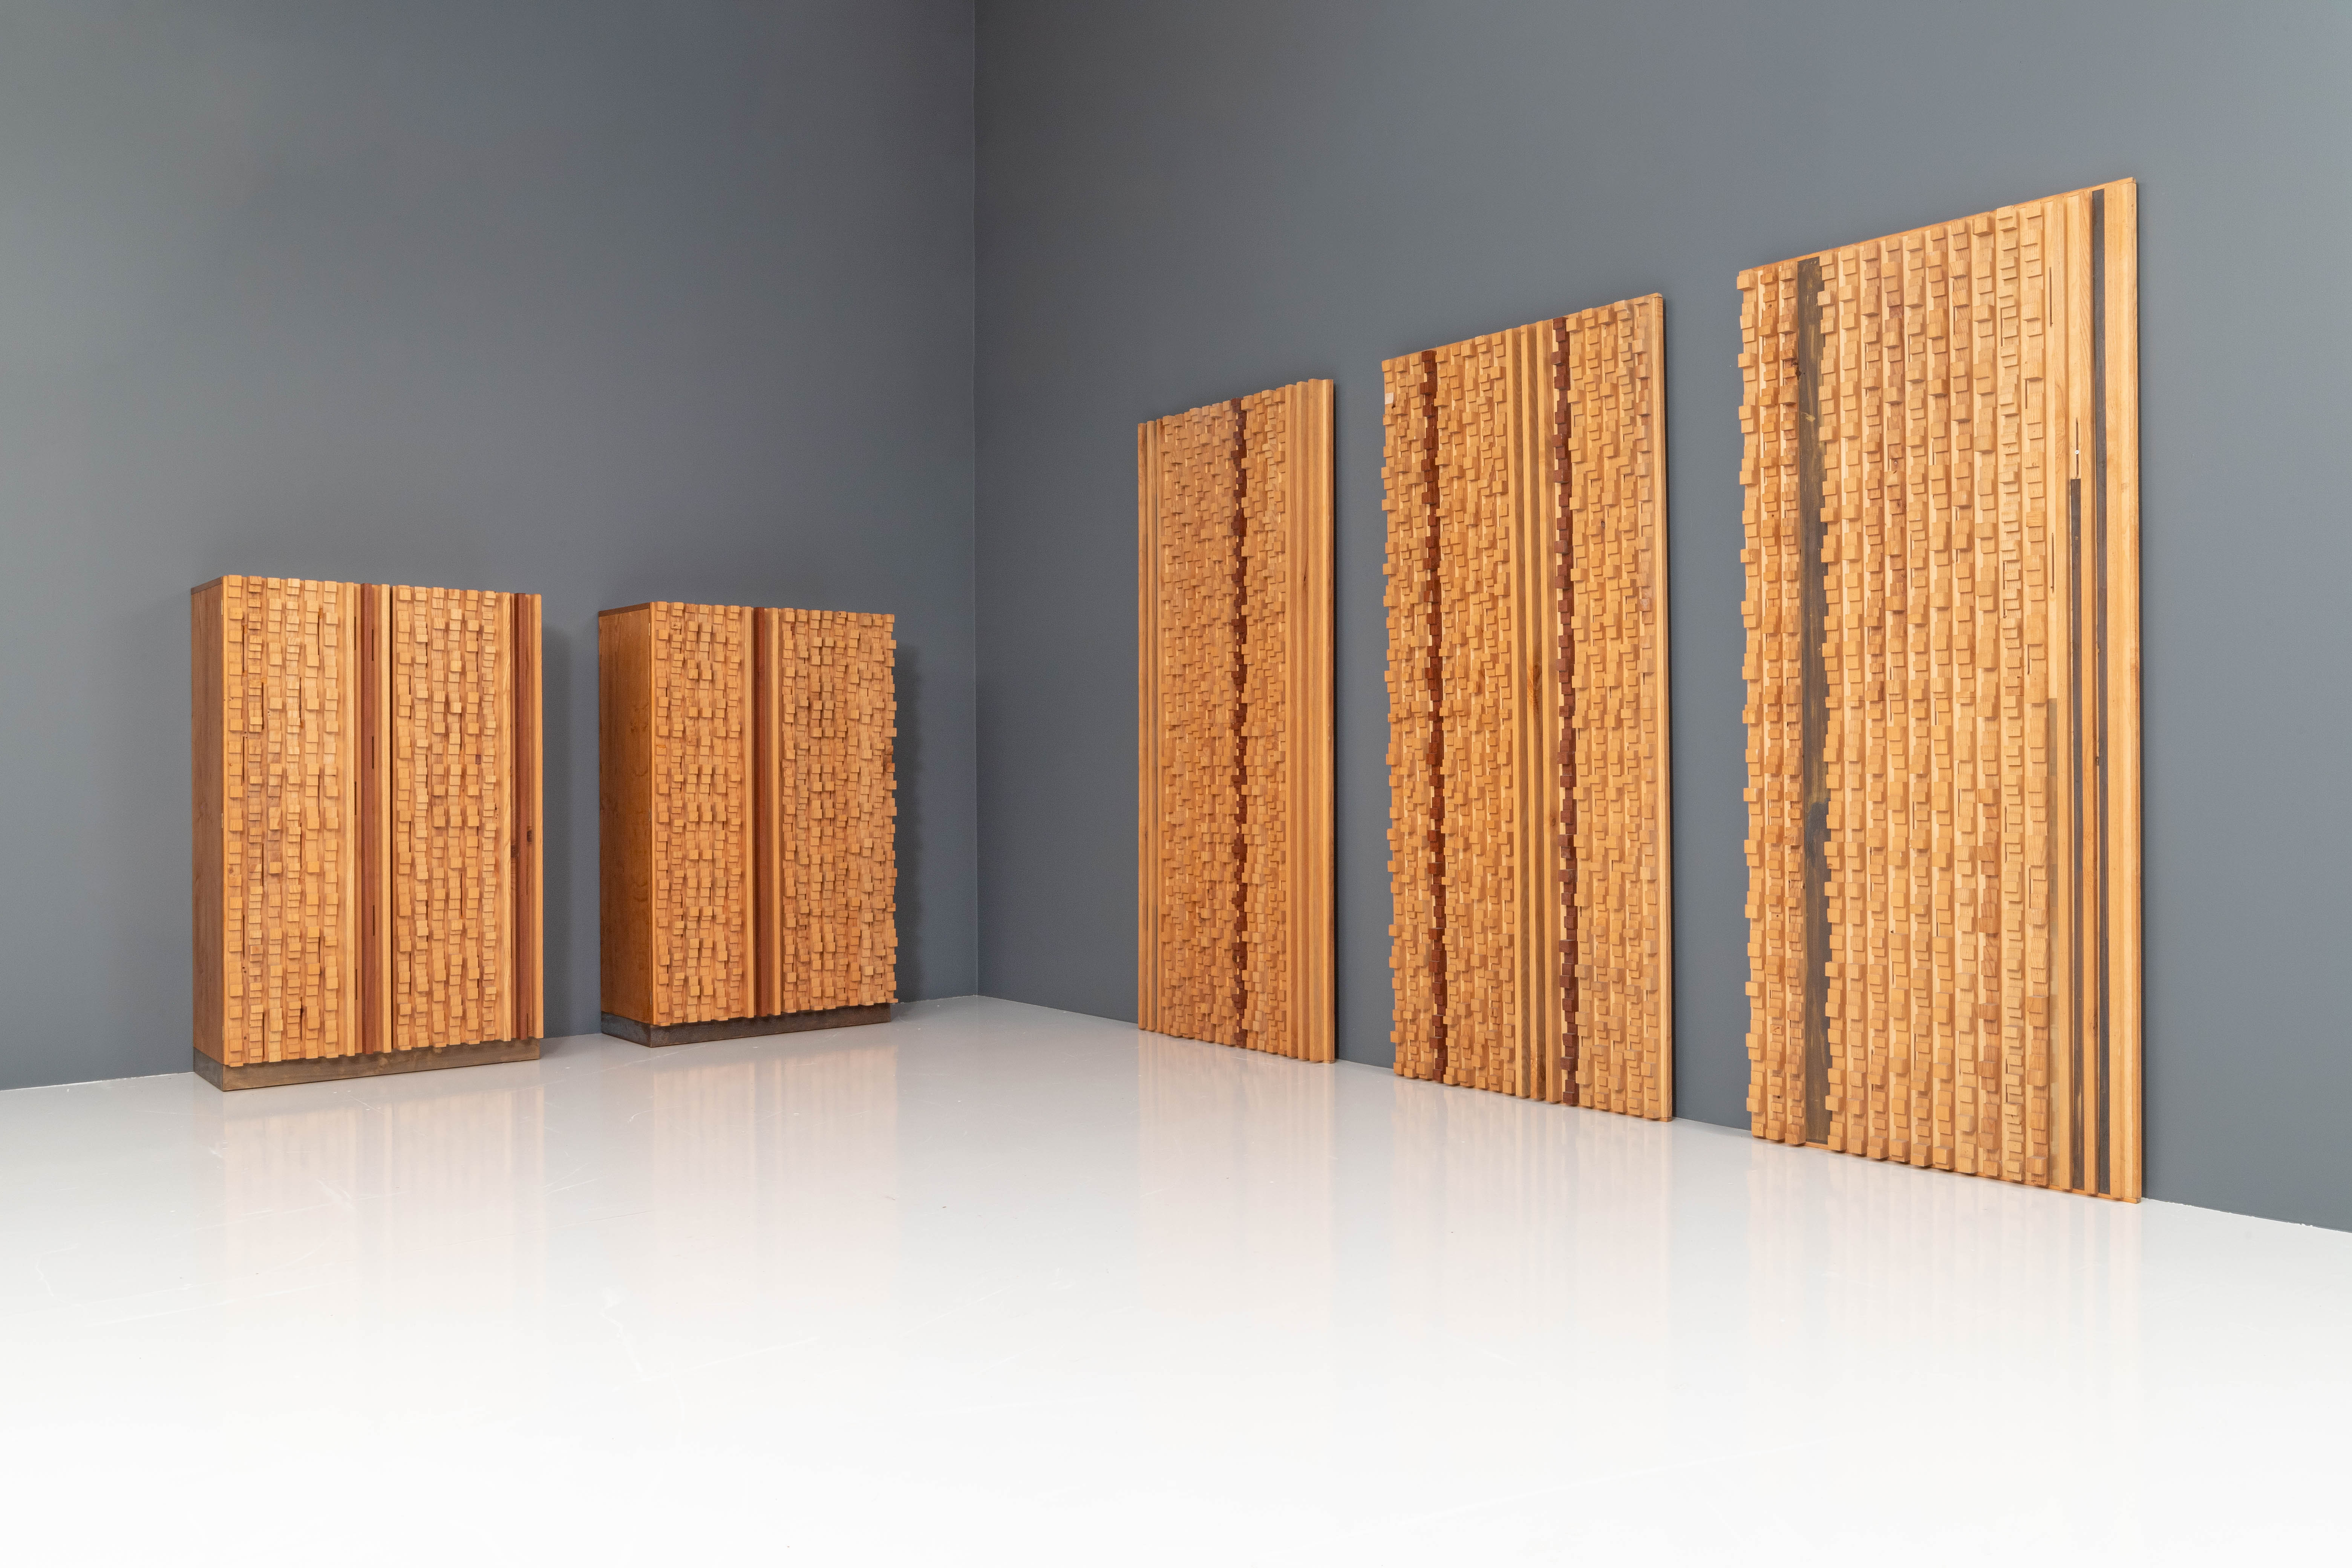 Unique and custom built set of 3 Wall Panels and 2 brutalist Cabinets by the Italian sculptor Stefano d’Amico in beech and brass, signed and dated, 1974.

There is not so much known about D'Amico's work apart from that he held expositions in Milan